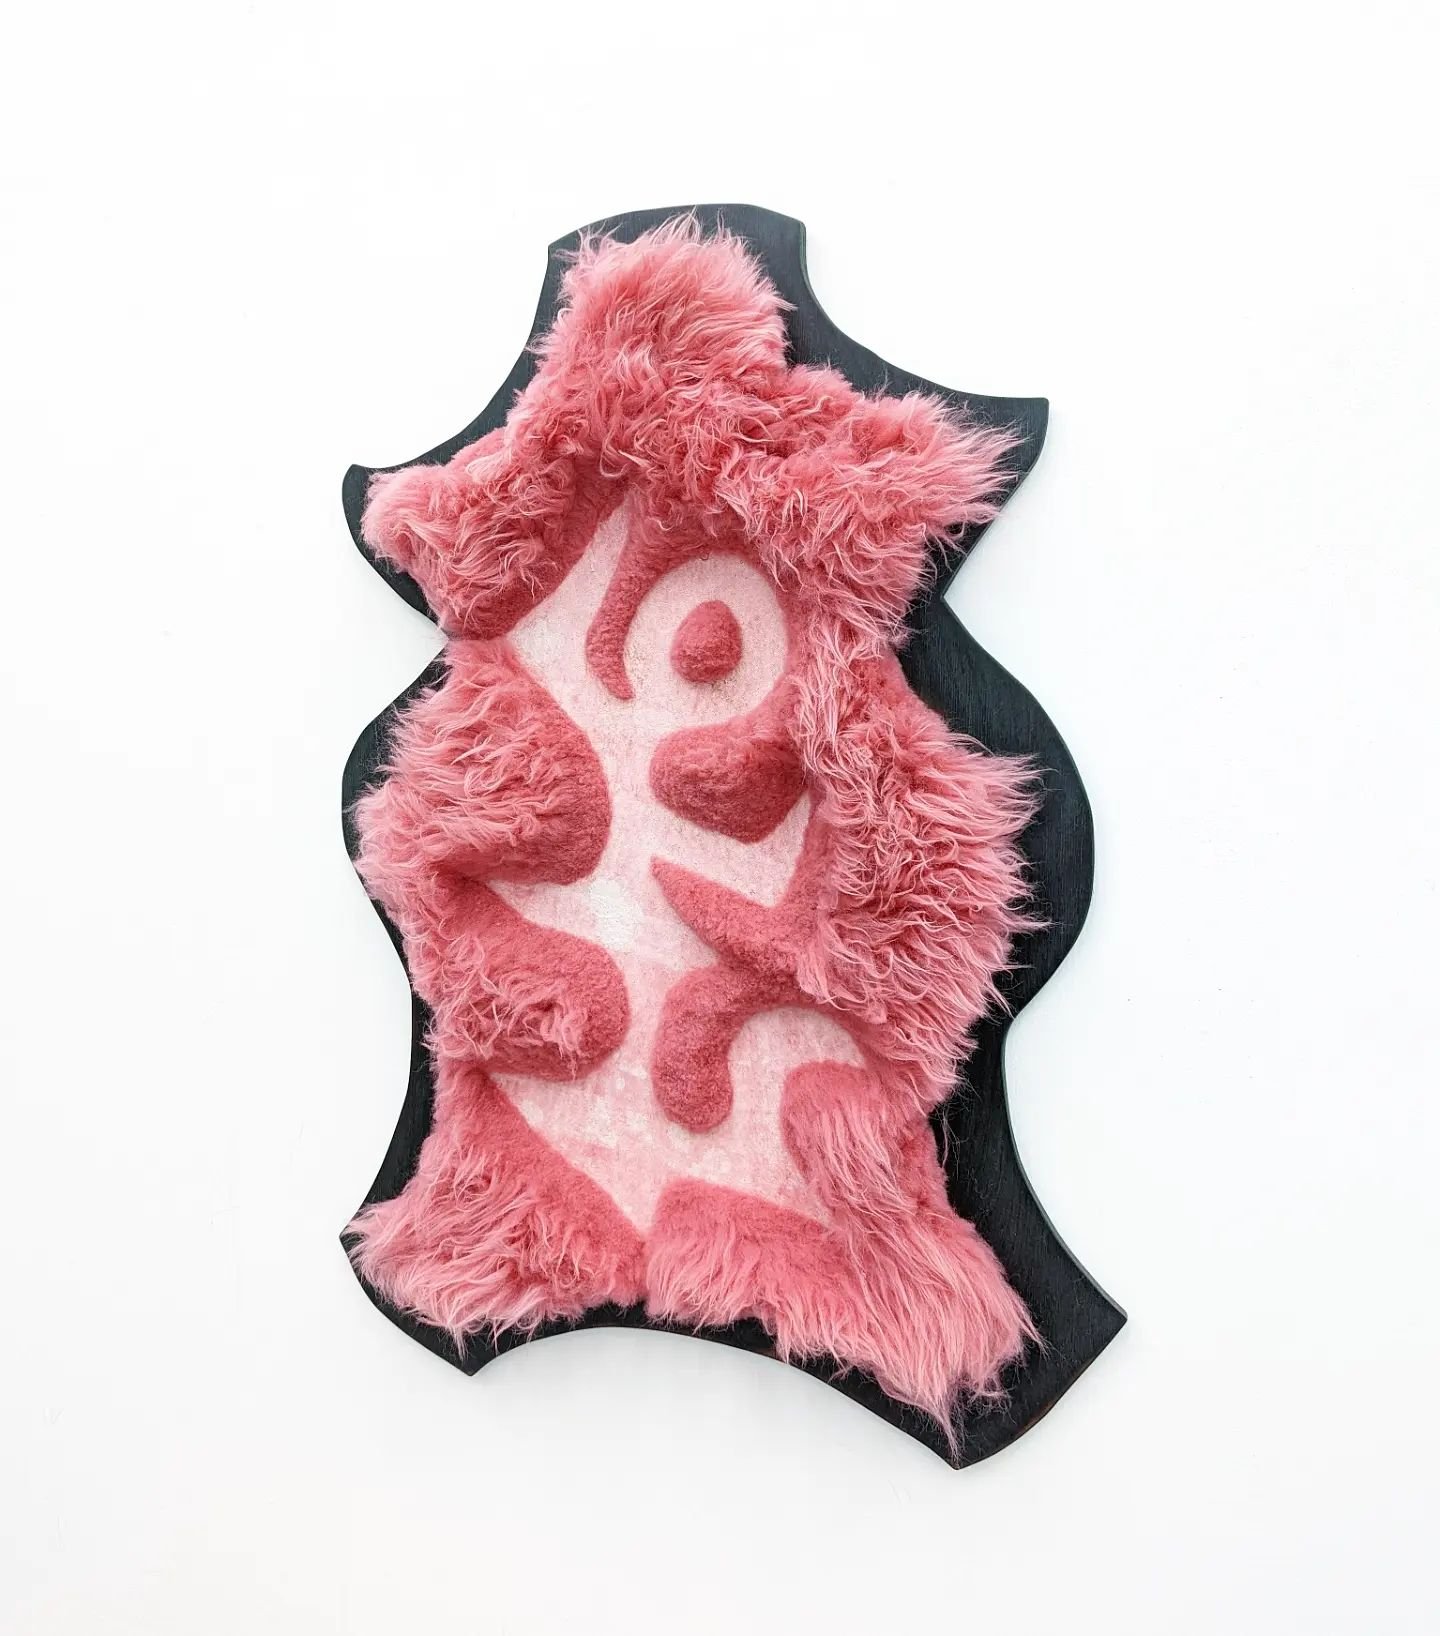  Paul Ferens  One in the pink two in the stink , 2022 Fur, plywood, oil 90 x 60 cm 600 € Artwork location: Berlin 